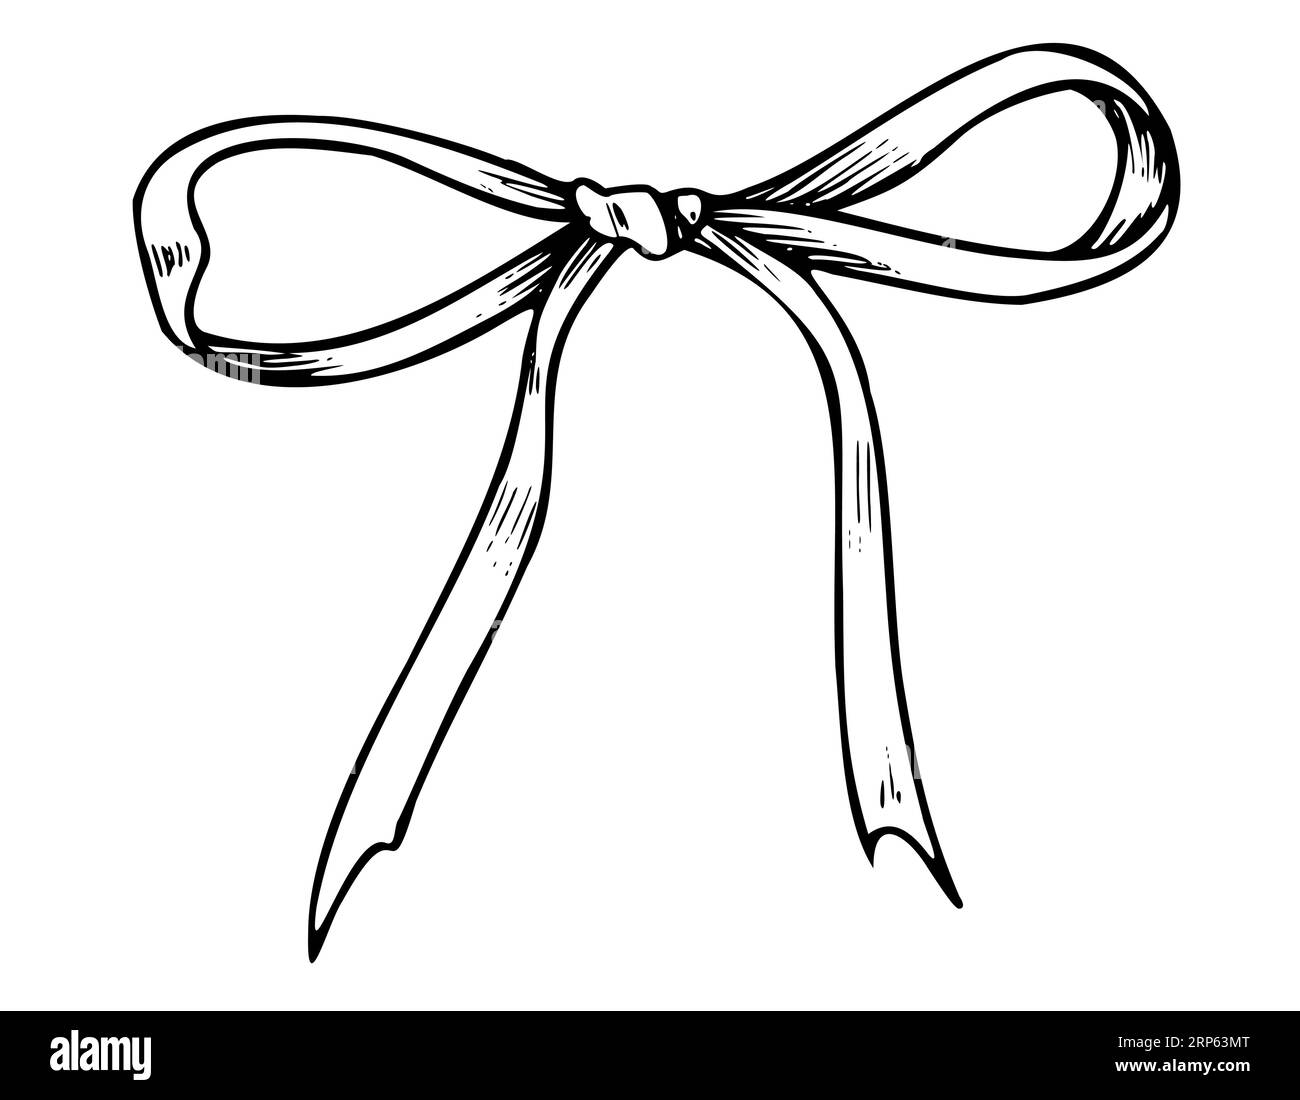 Ribbon with Bow. Hand drawn vector illustration of satin or silk knot on white isolated background for gift or present in line art style. Drawing of ornate textile tape painted by black inks. Stock Vector